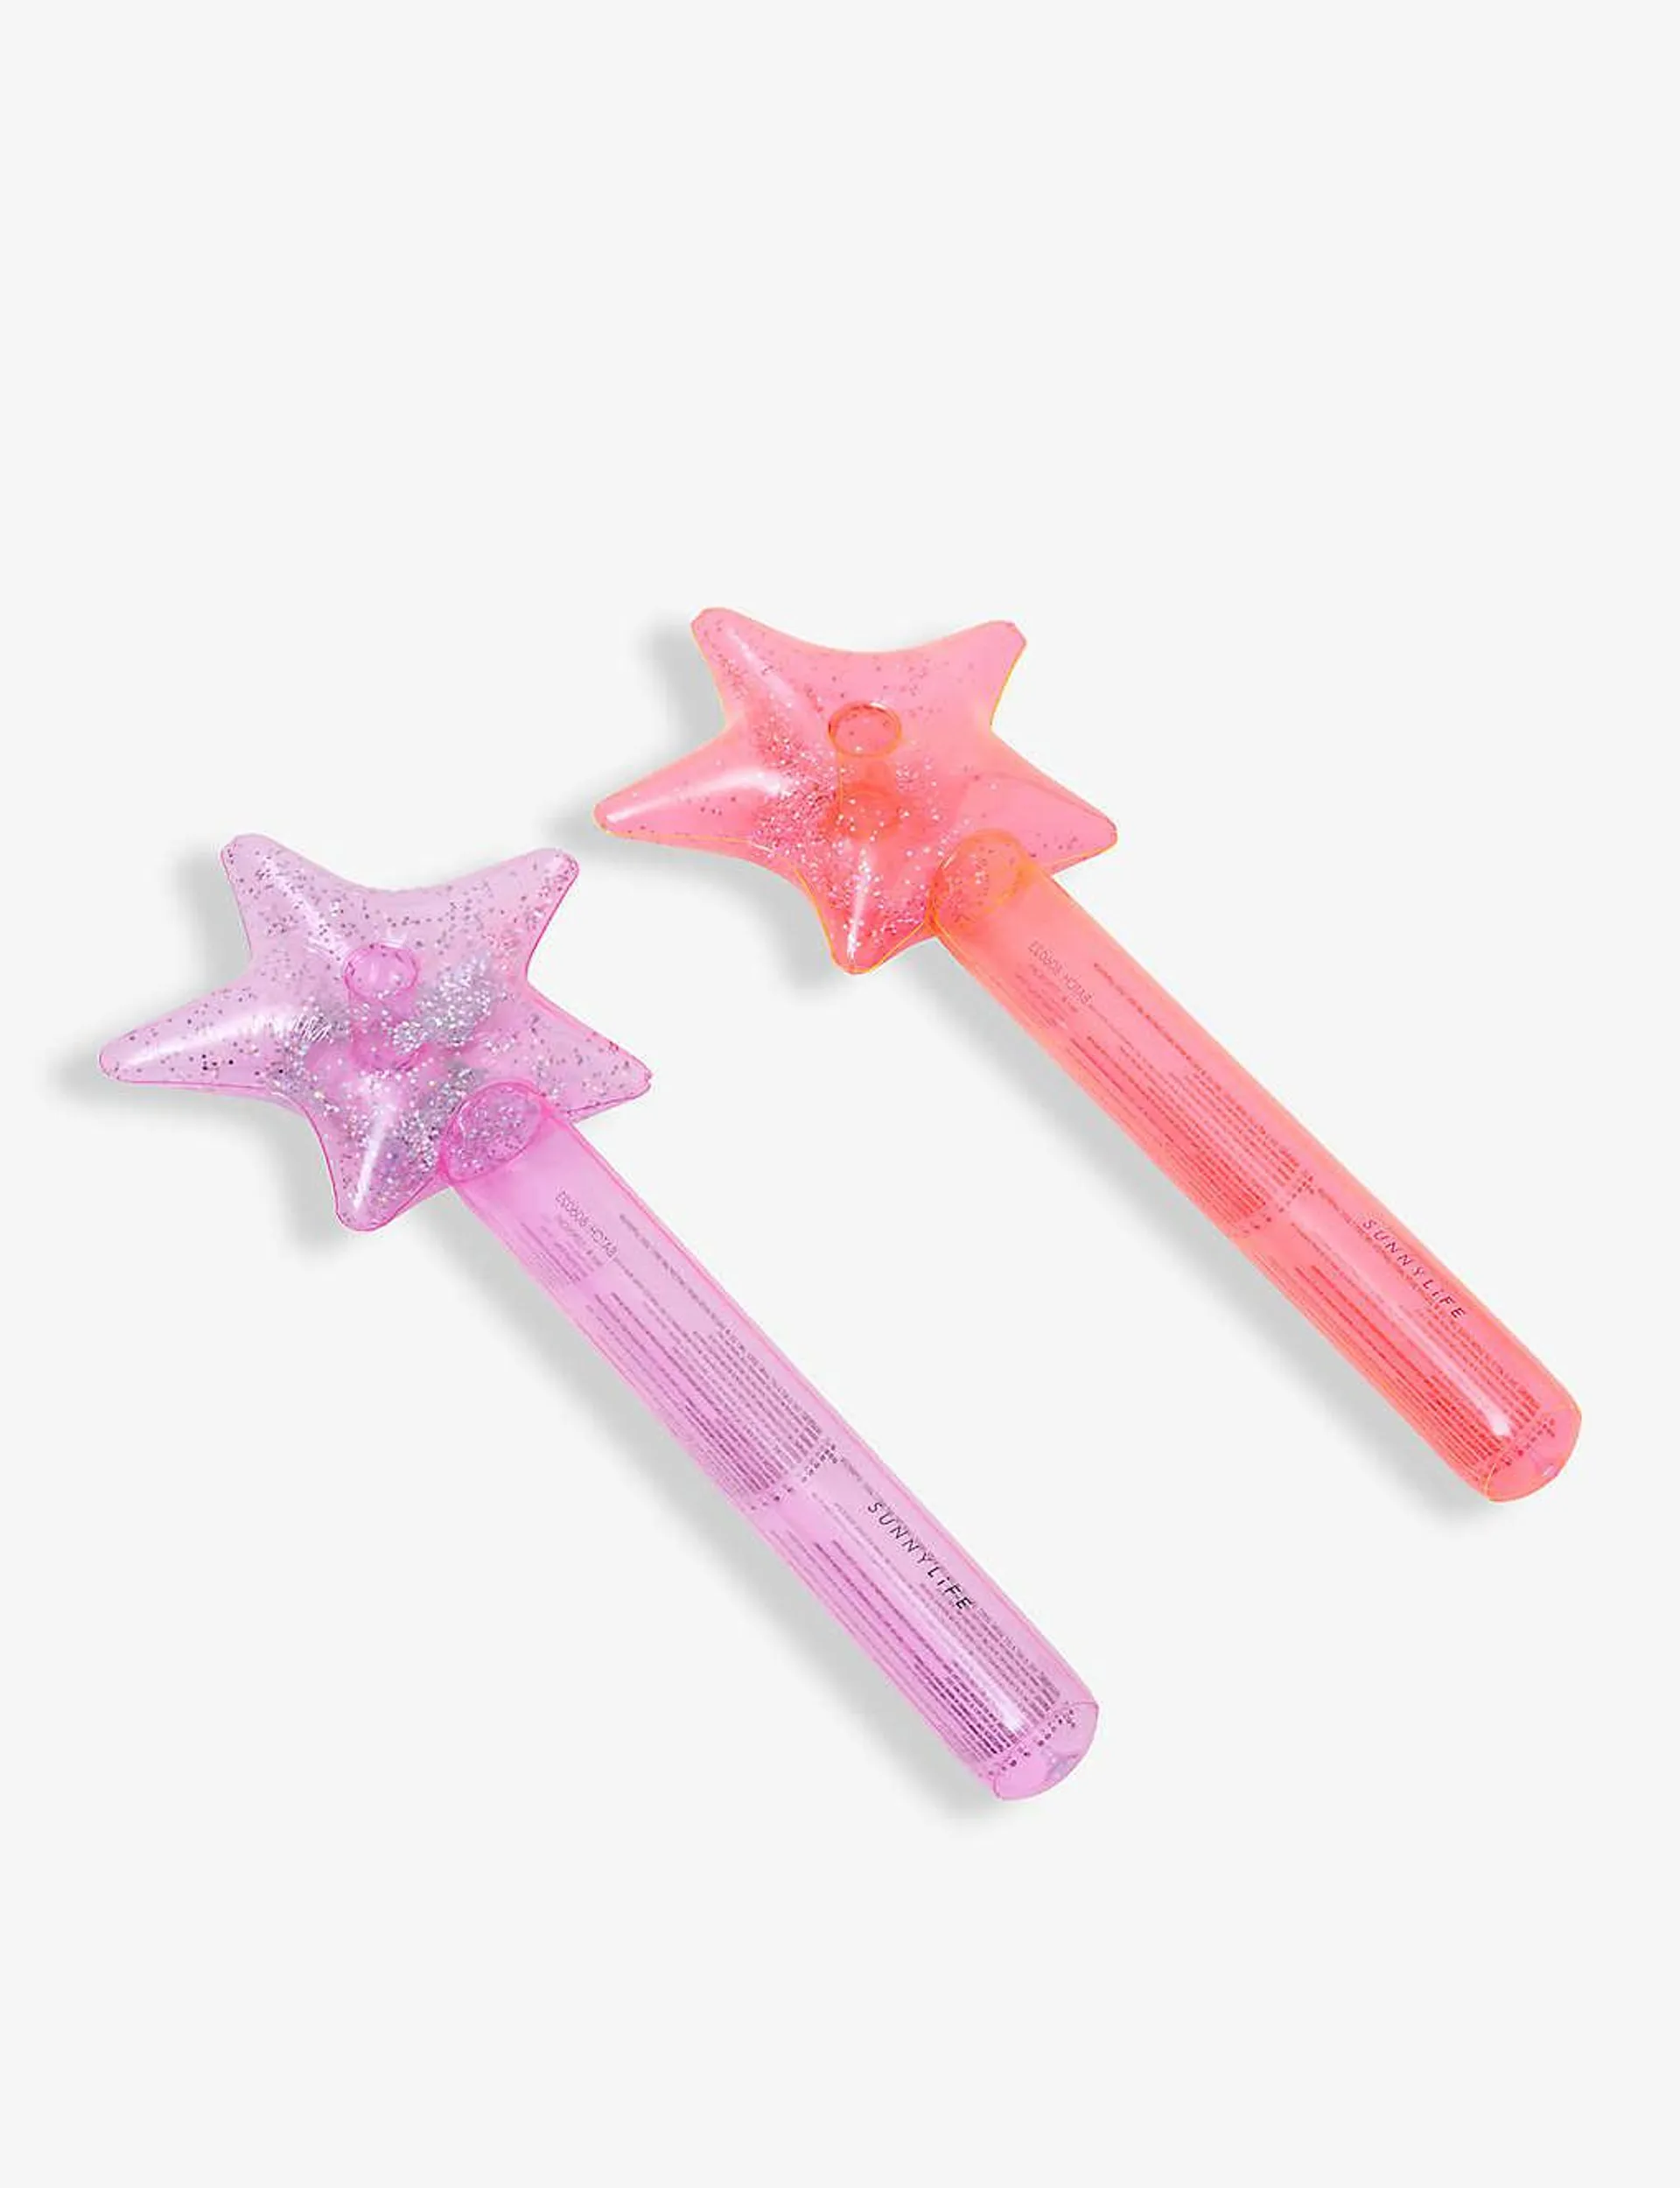 Glitter star-shaped inflatable pool float pack of two 100cm